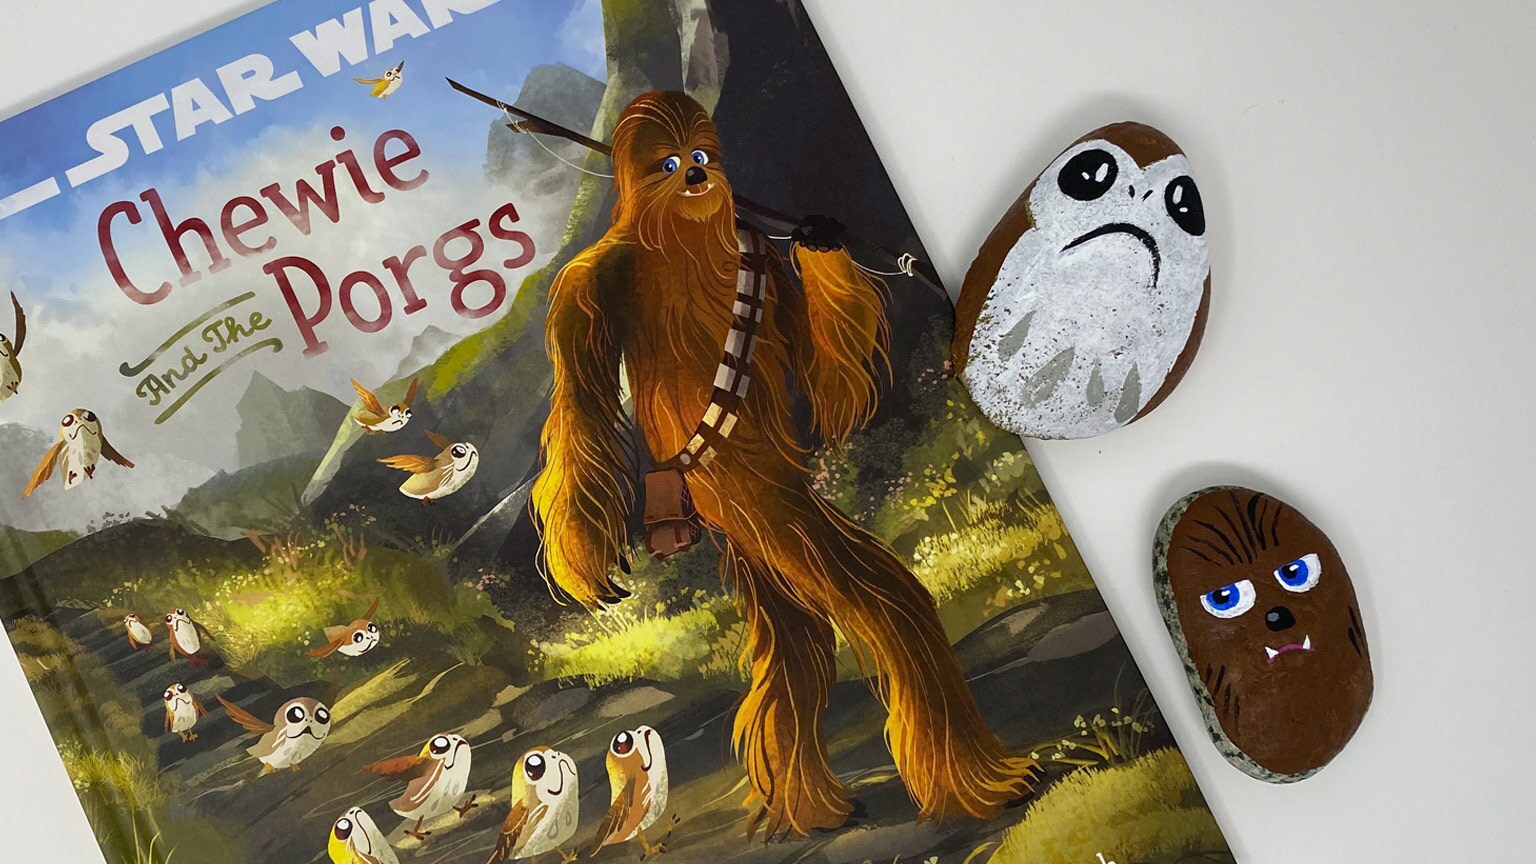 Spend a Day with Chewie and the Porgs with This Read-Along and Rock-Painting DIY